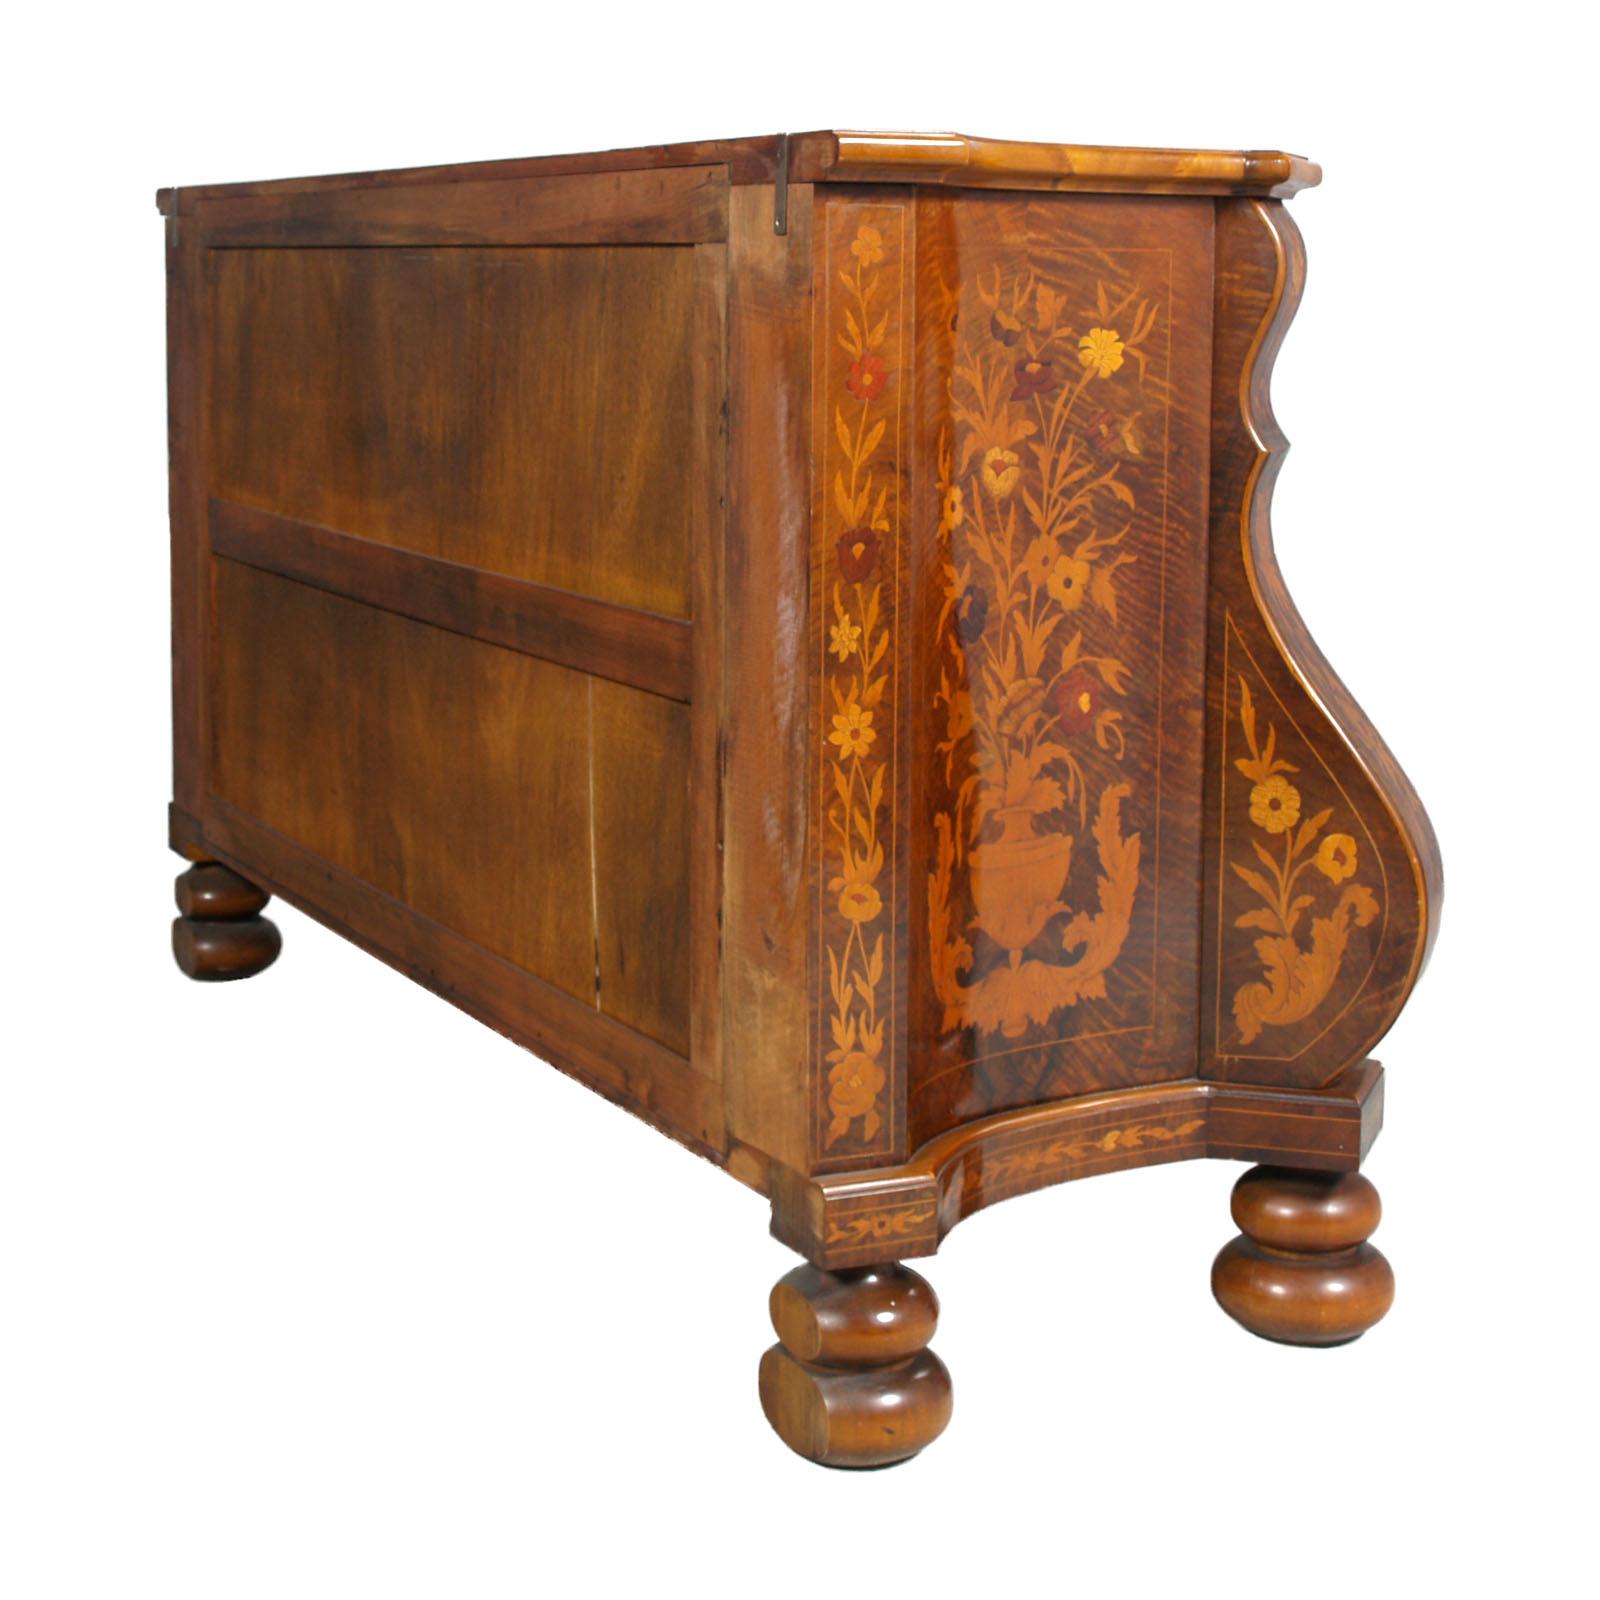 1930s Venetian Walnut Baroque Sideboard and Display Cabinet Richly Floral Inlaid For Sale 7